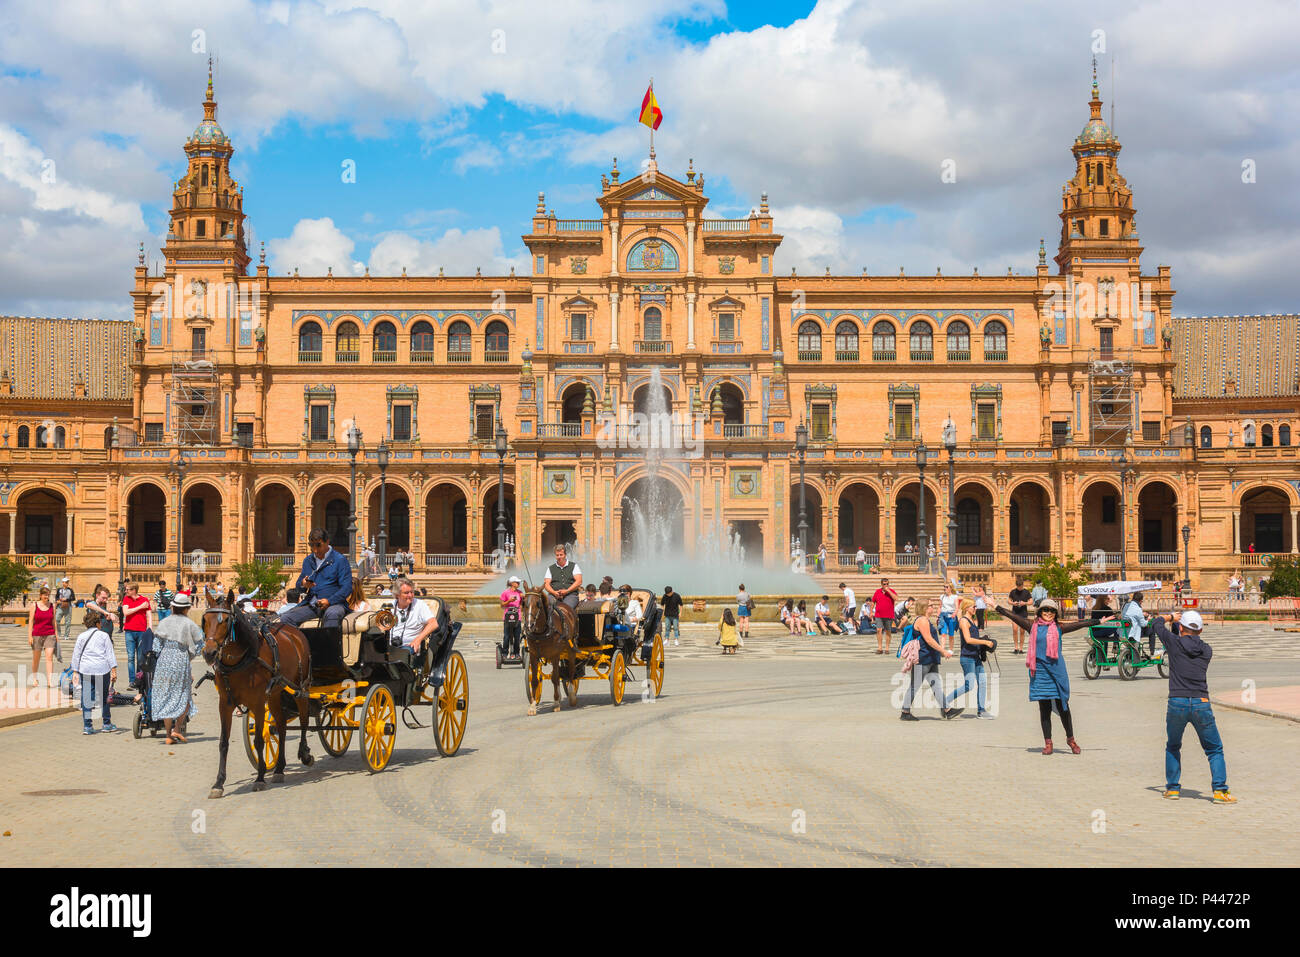 Plaza de Espana Seville, view of tourists riding in carriages through the Plaza de Espana on a summer afternoon, Sevilla, Andalucia, Spain. Stock Photo